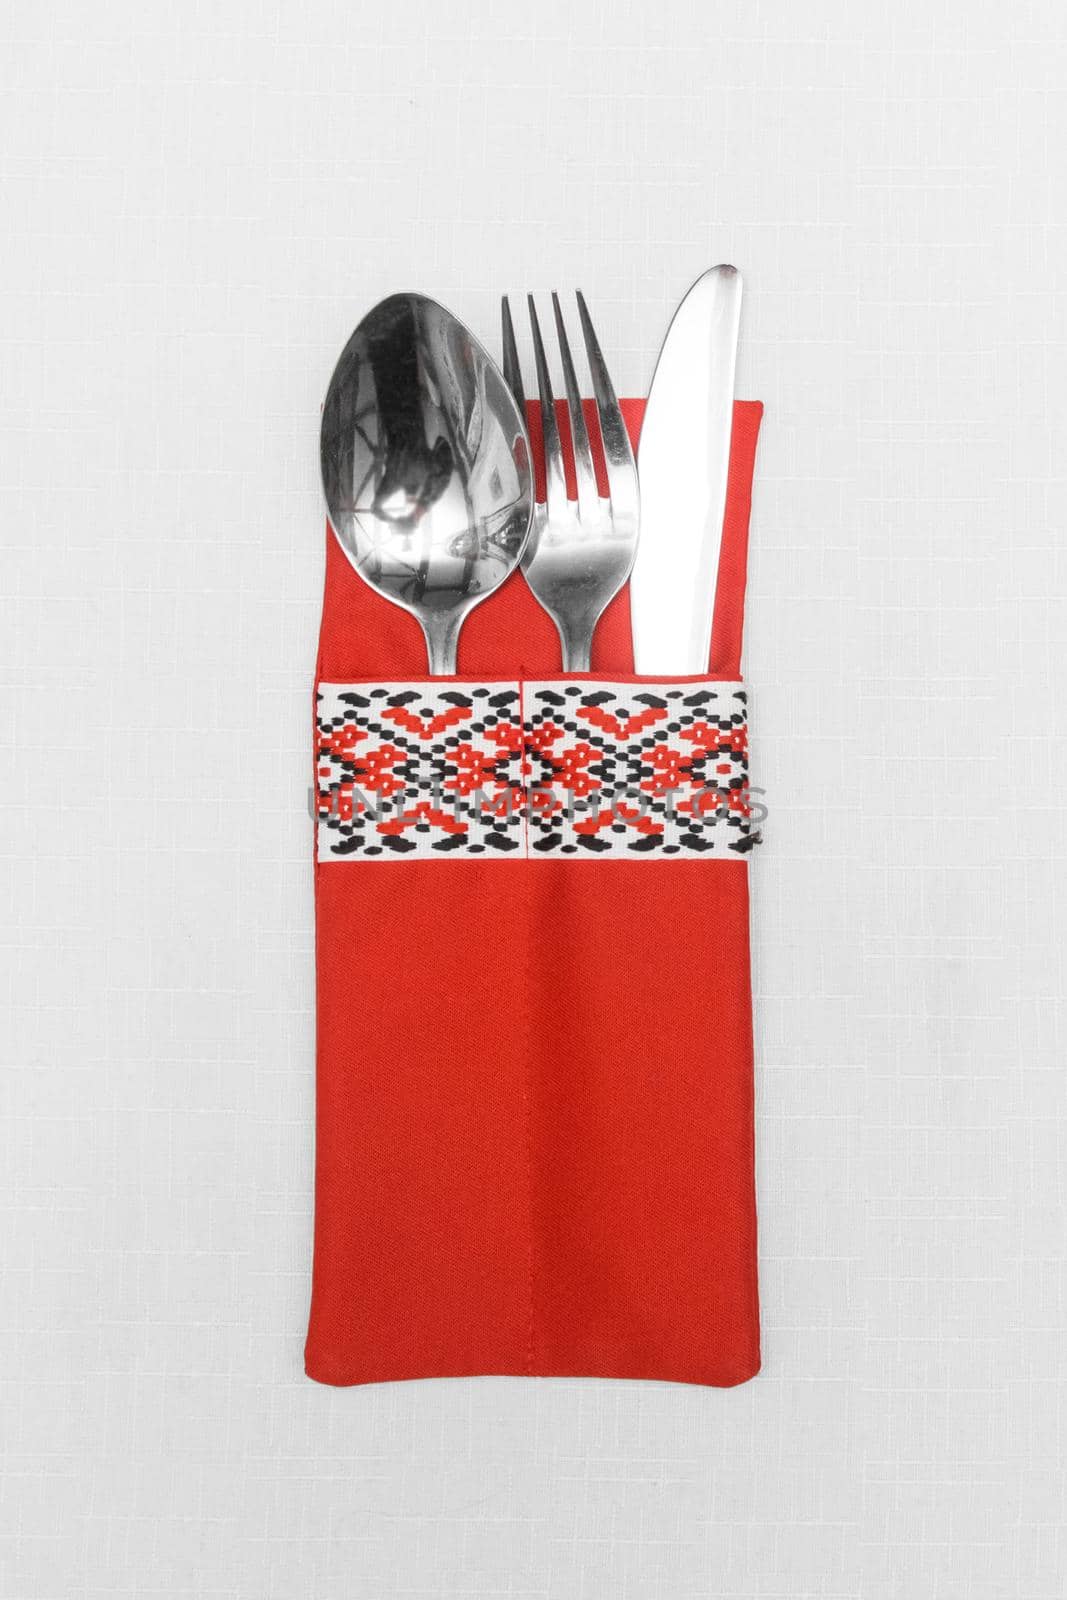 Spoon fork and knife cutlery utensil silverware in traditional ornament style on white tablecloth background by AYDO8